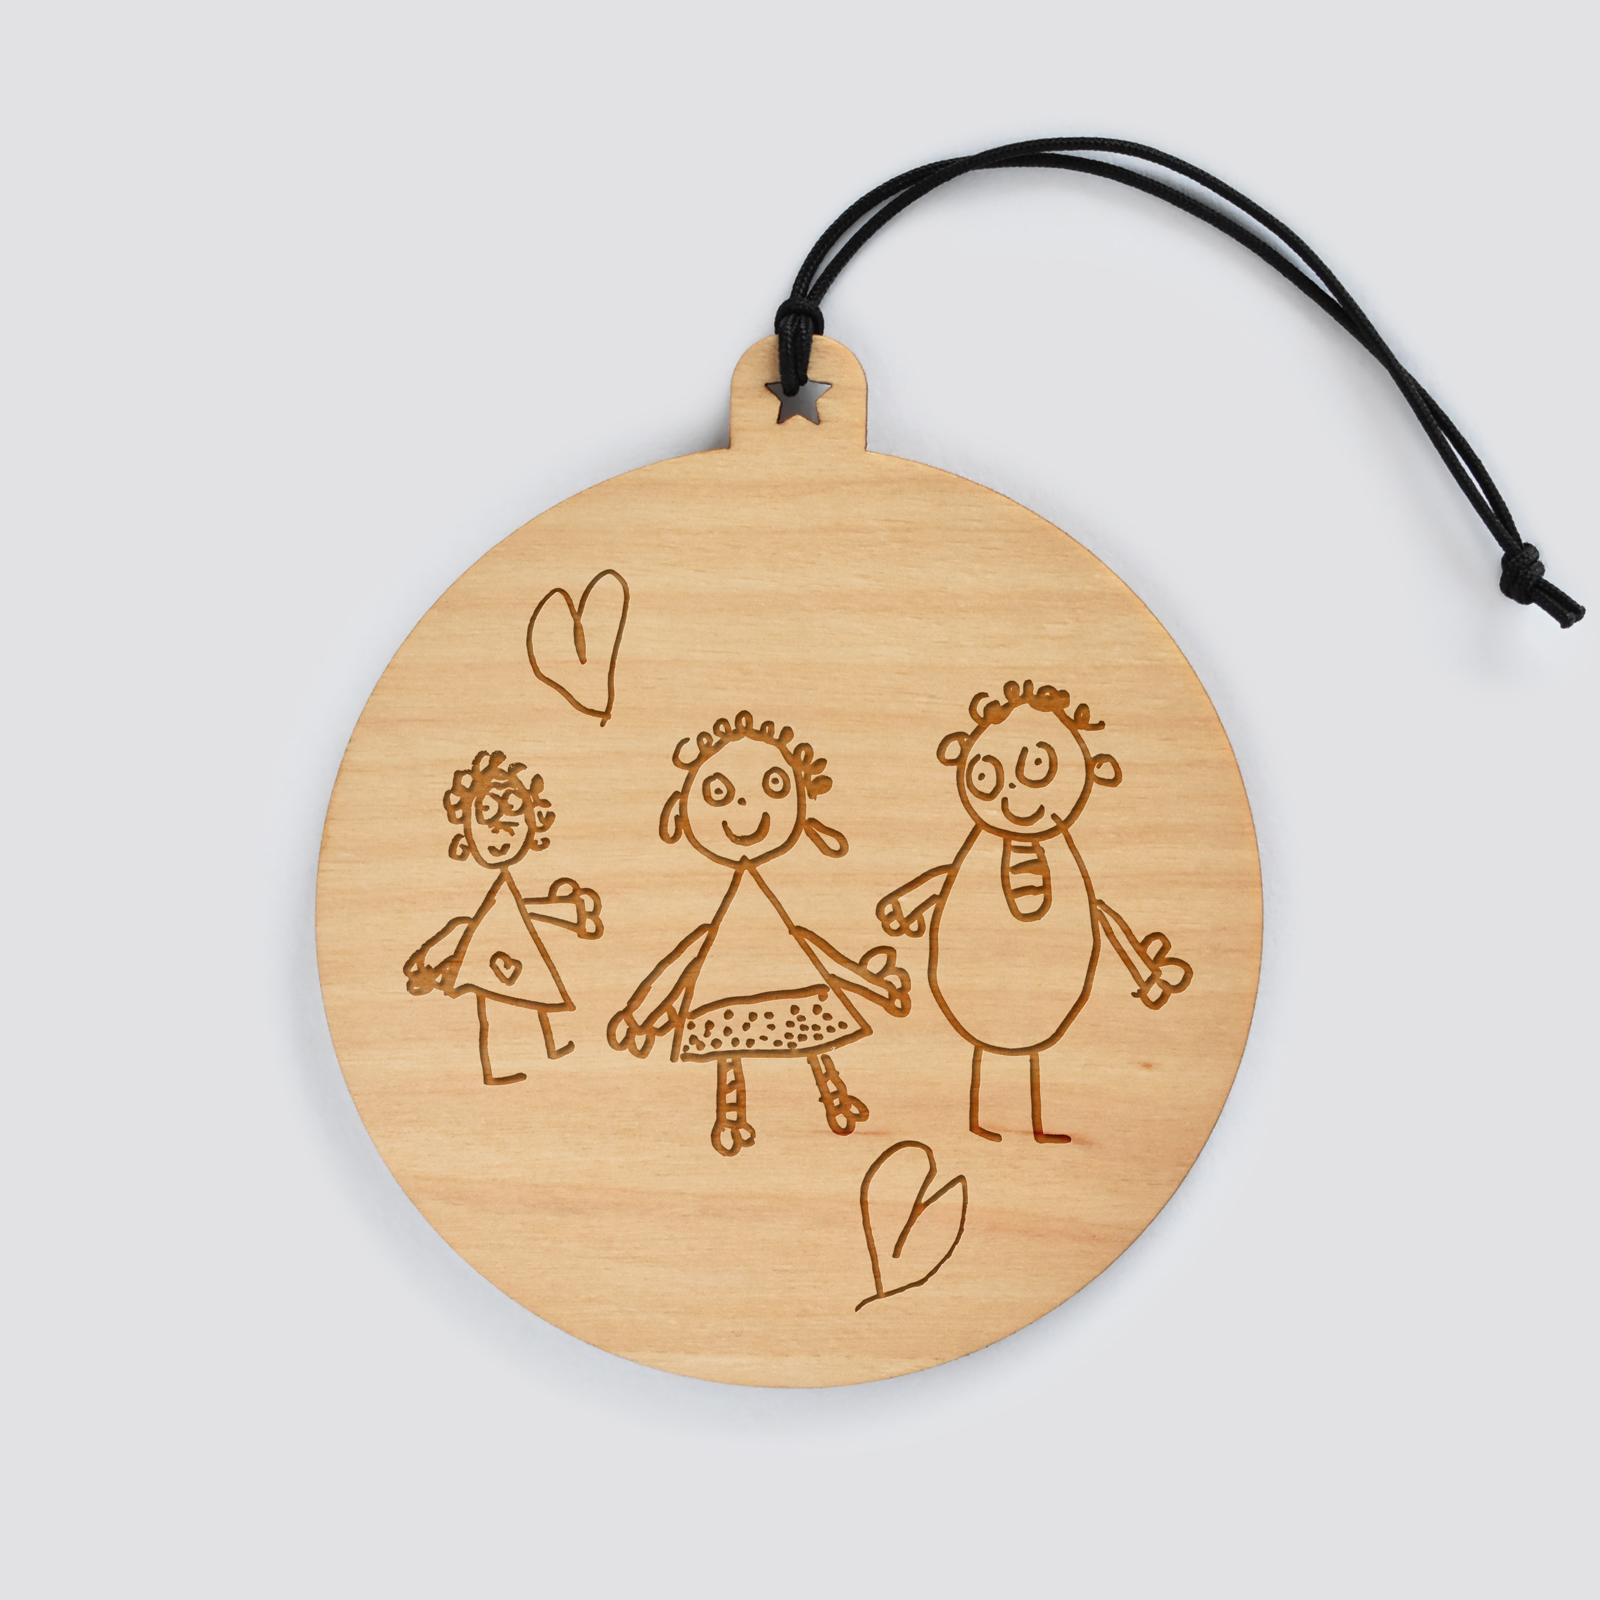 Personalised engraved wooden round Christmas bauble - sketch